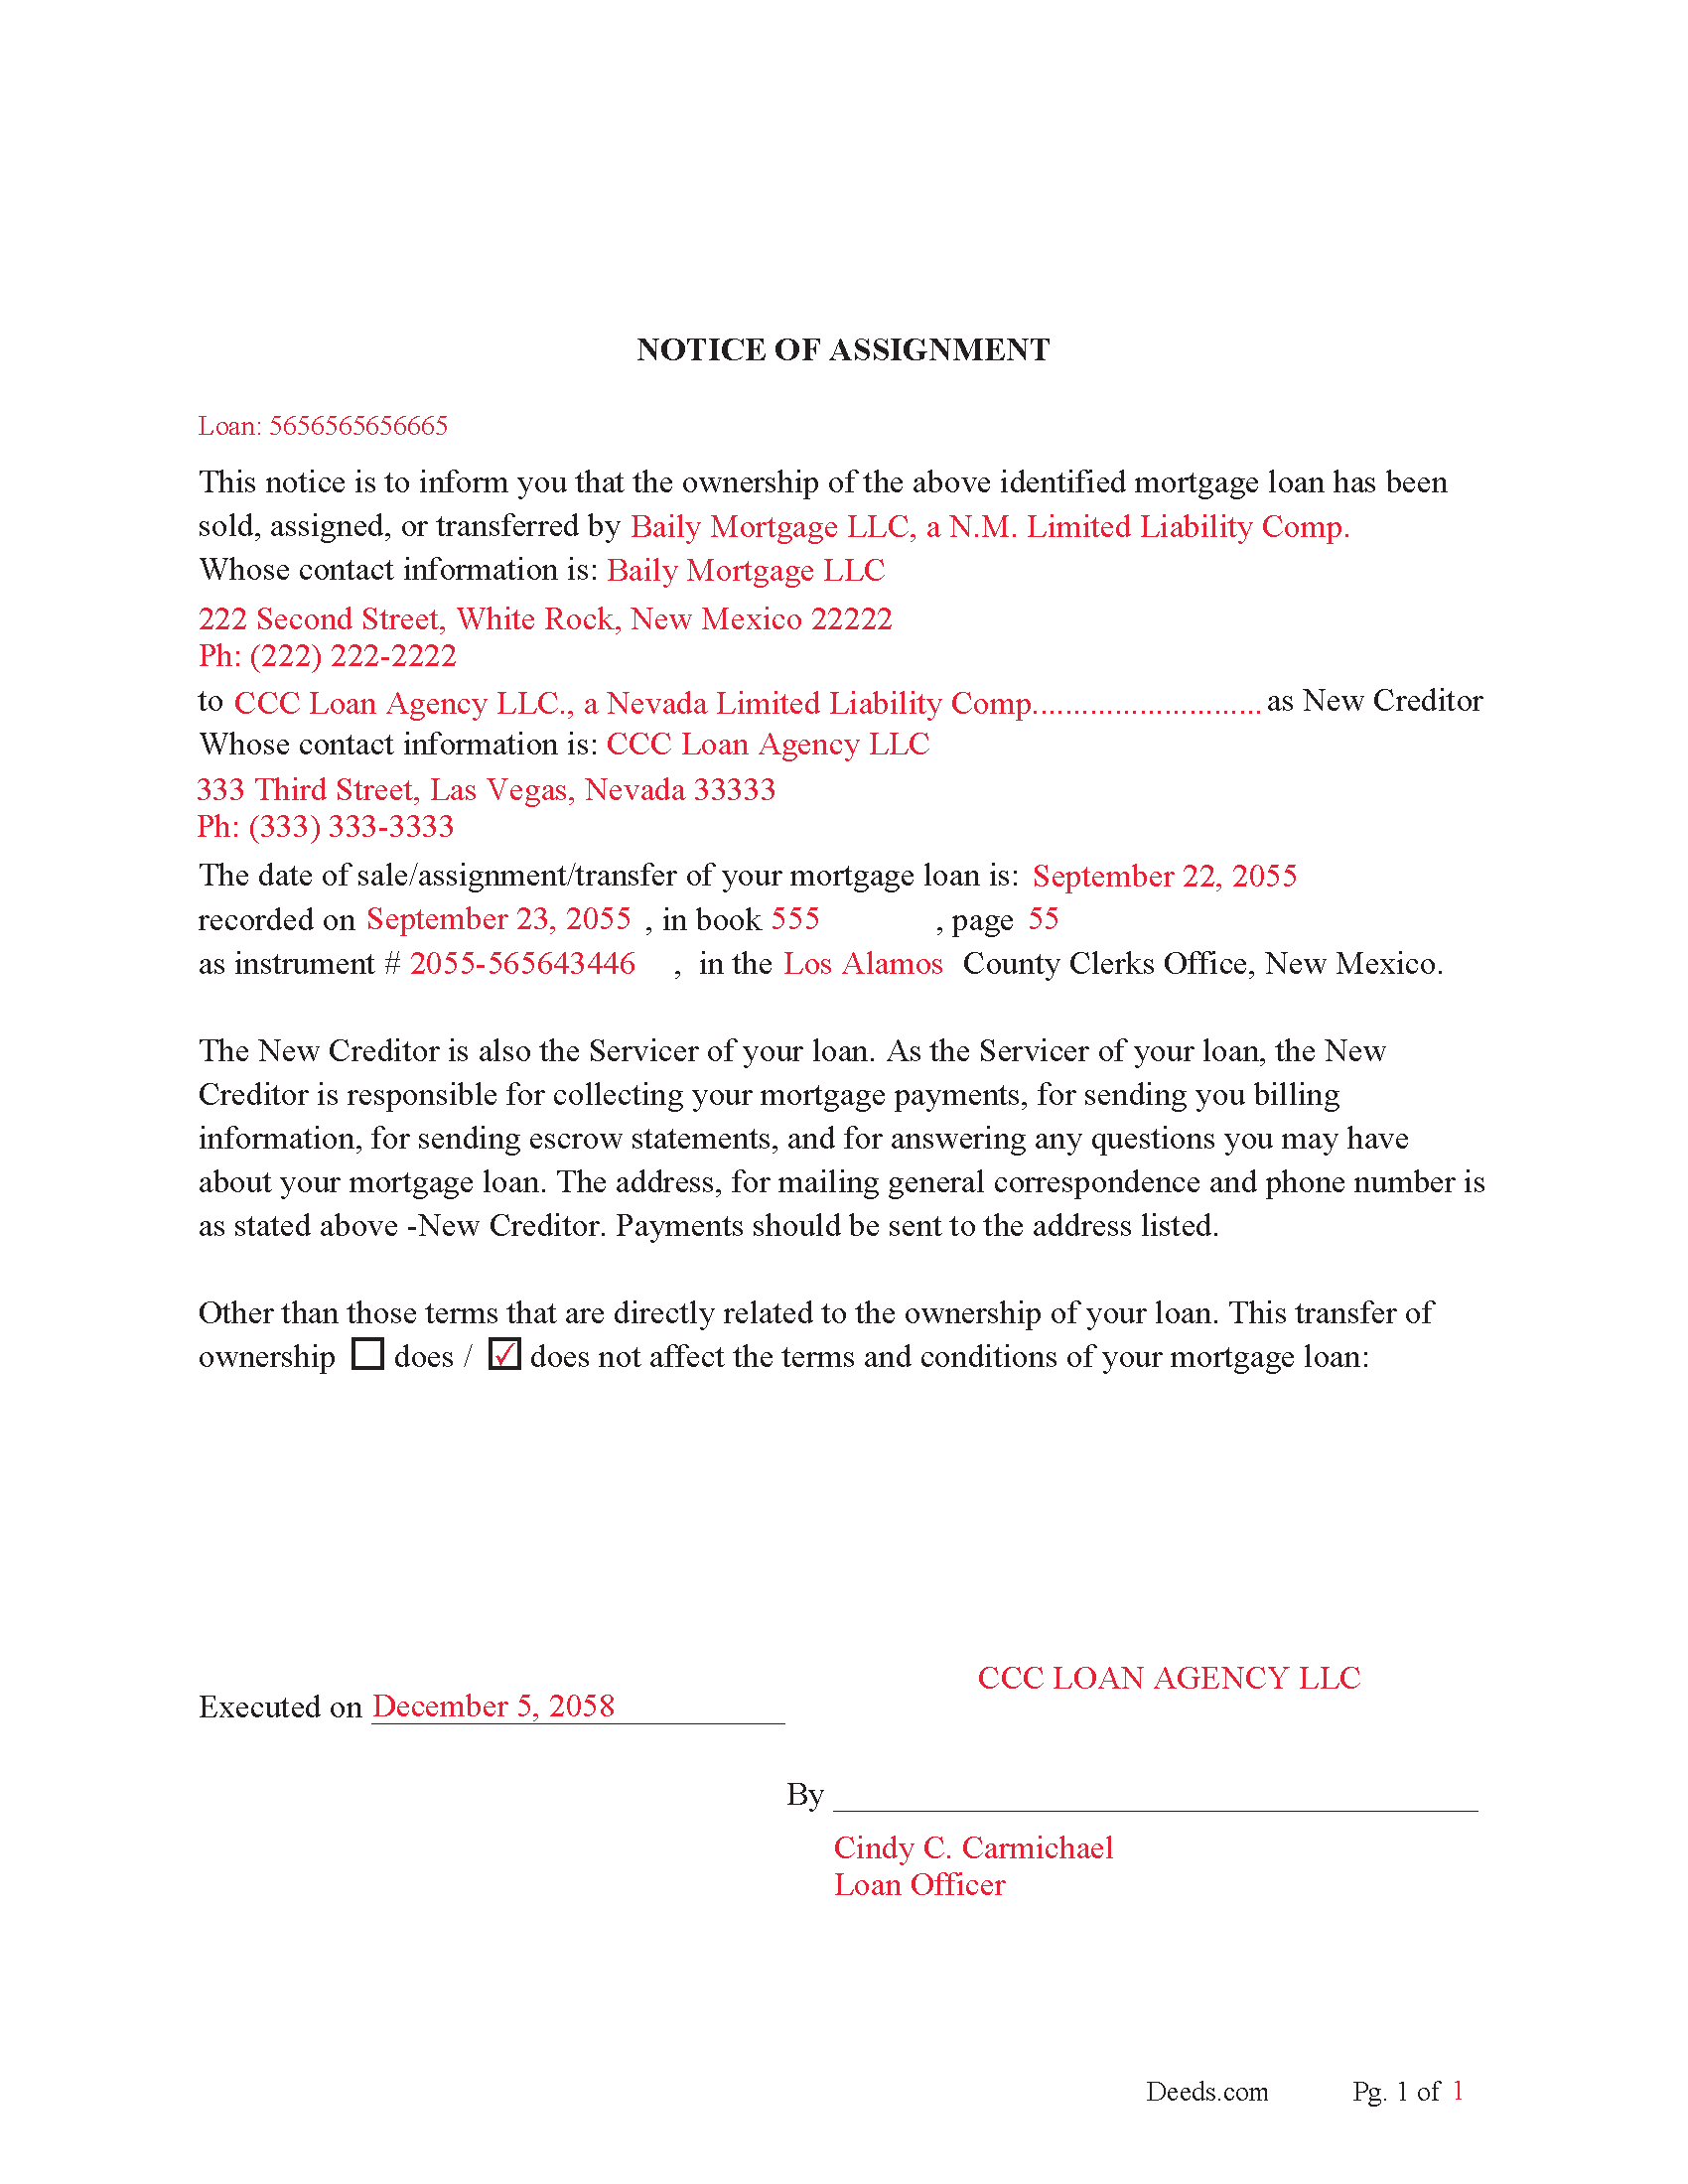 Completed Example of Notice of Assignment Document